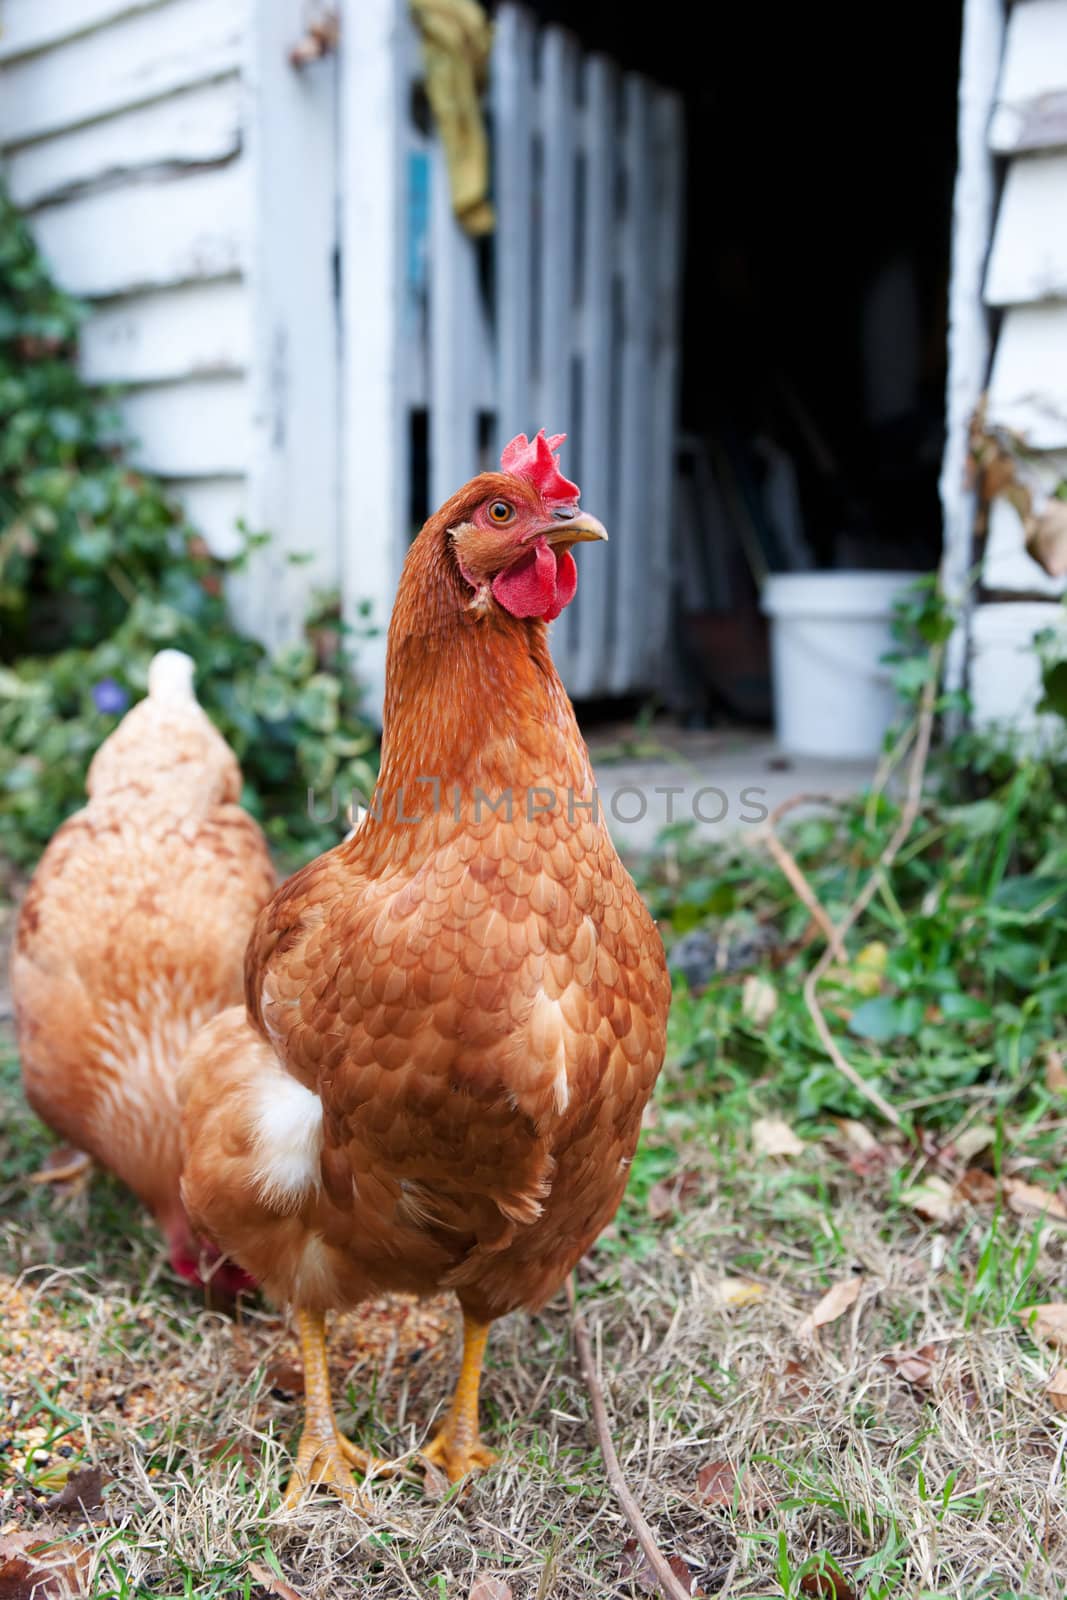 image of isobrown chickens in the yard